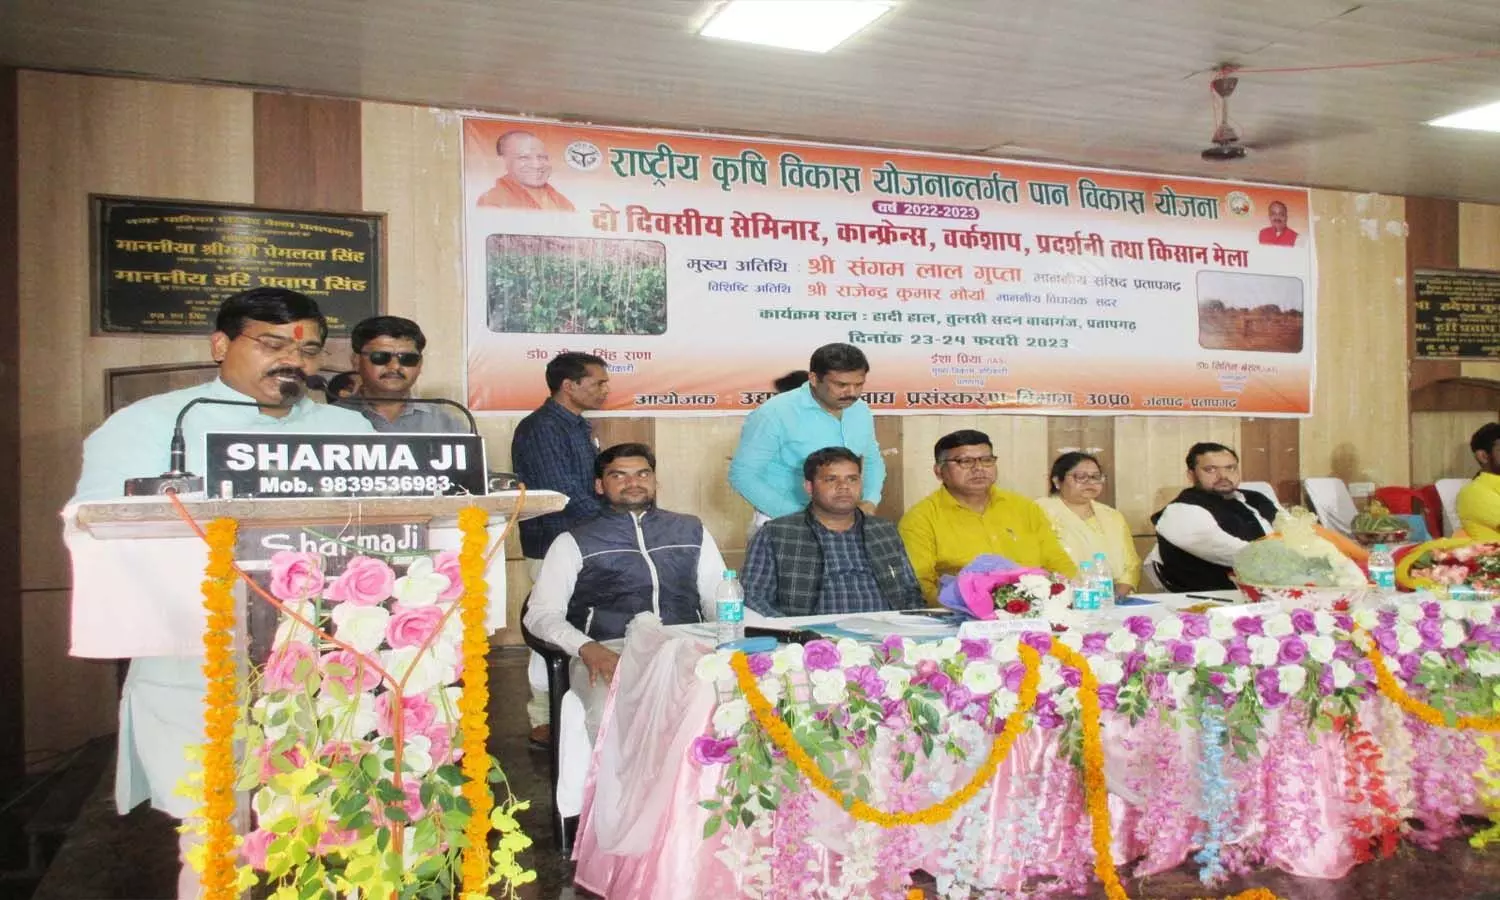 MP inaugurated the two-day farmers meeting, said - farmers should take advantage of the PMFME scheme